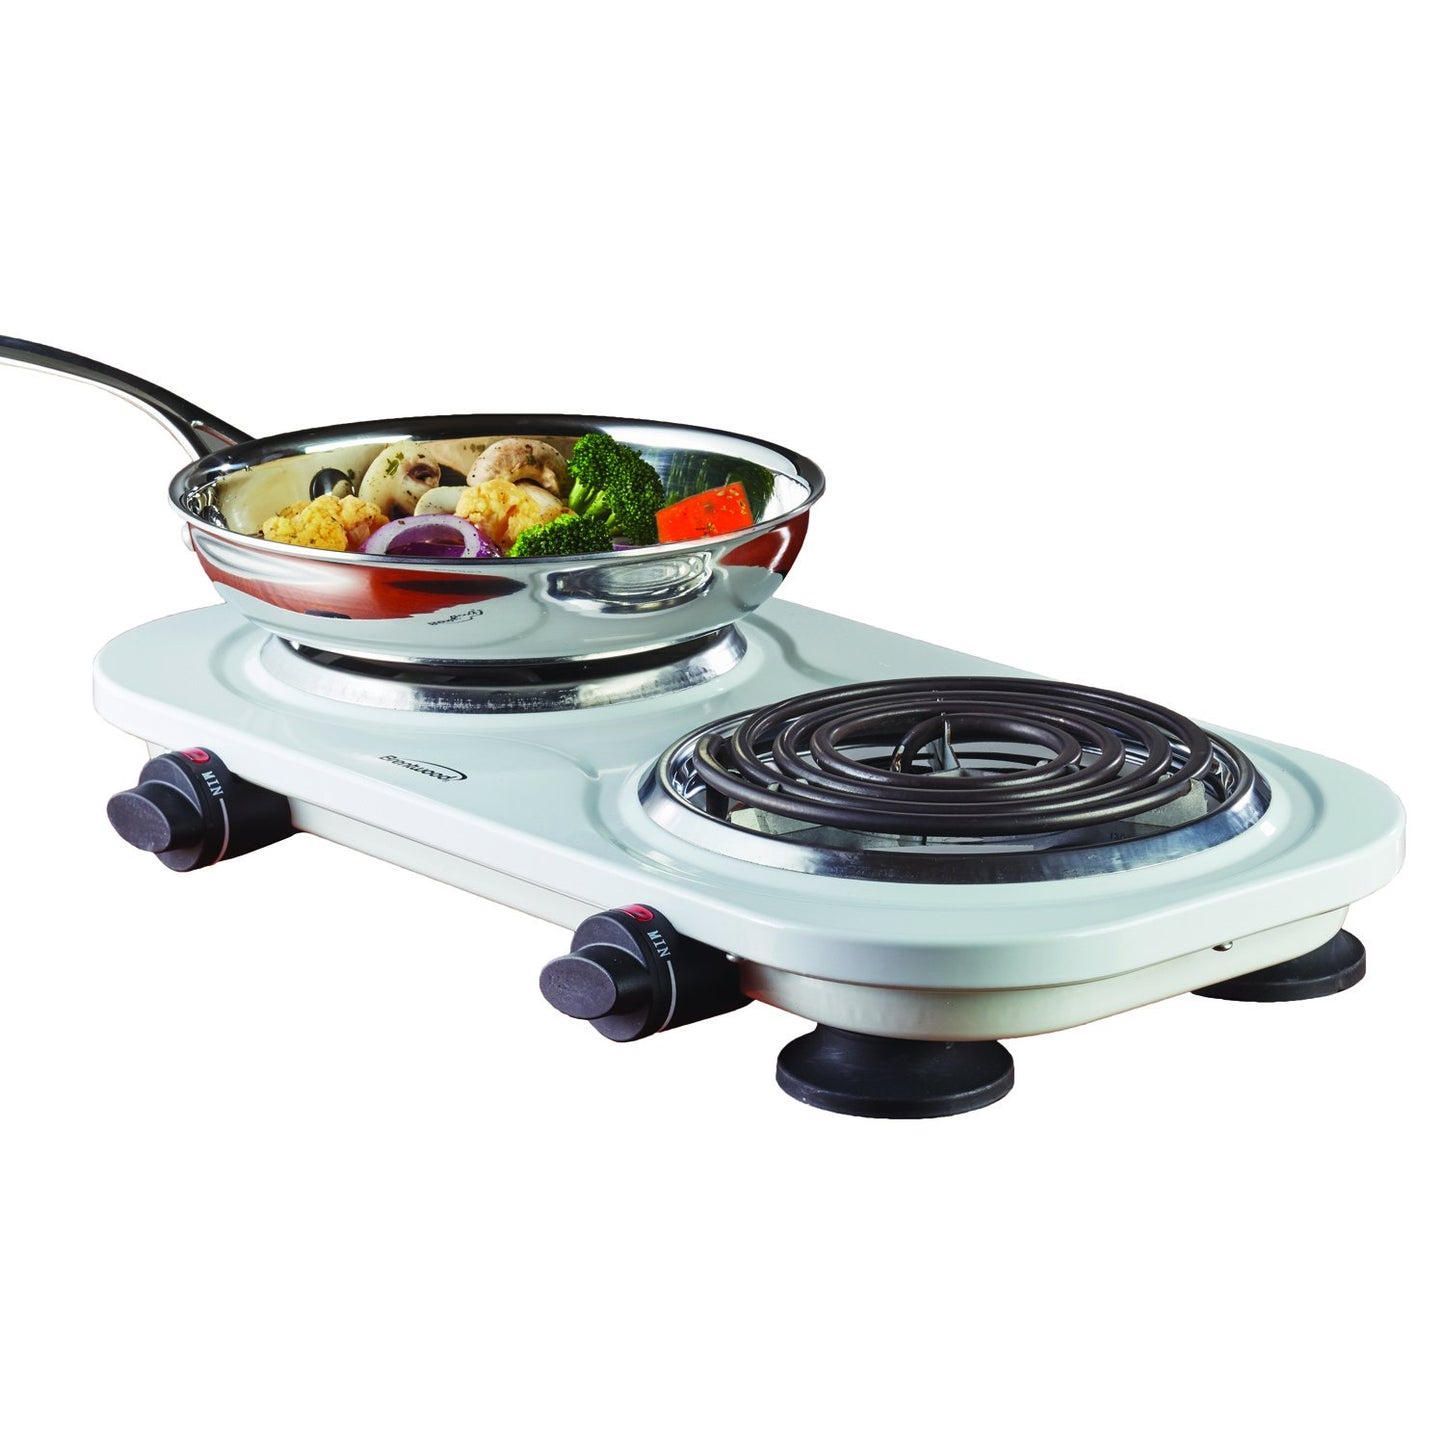 Brentwood Appl. TS-361W 1,500W Double Electric Burner (White)